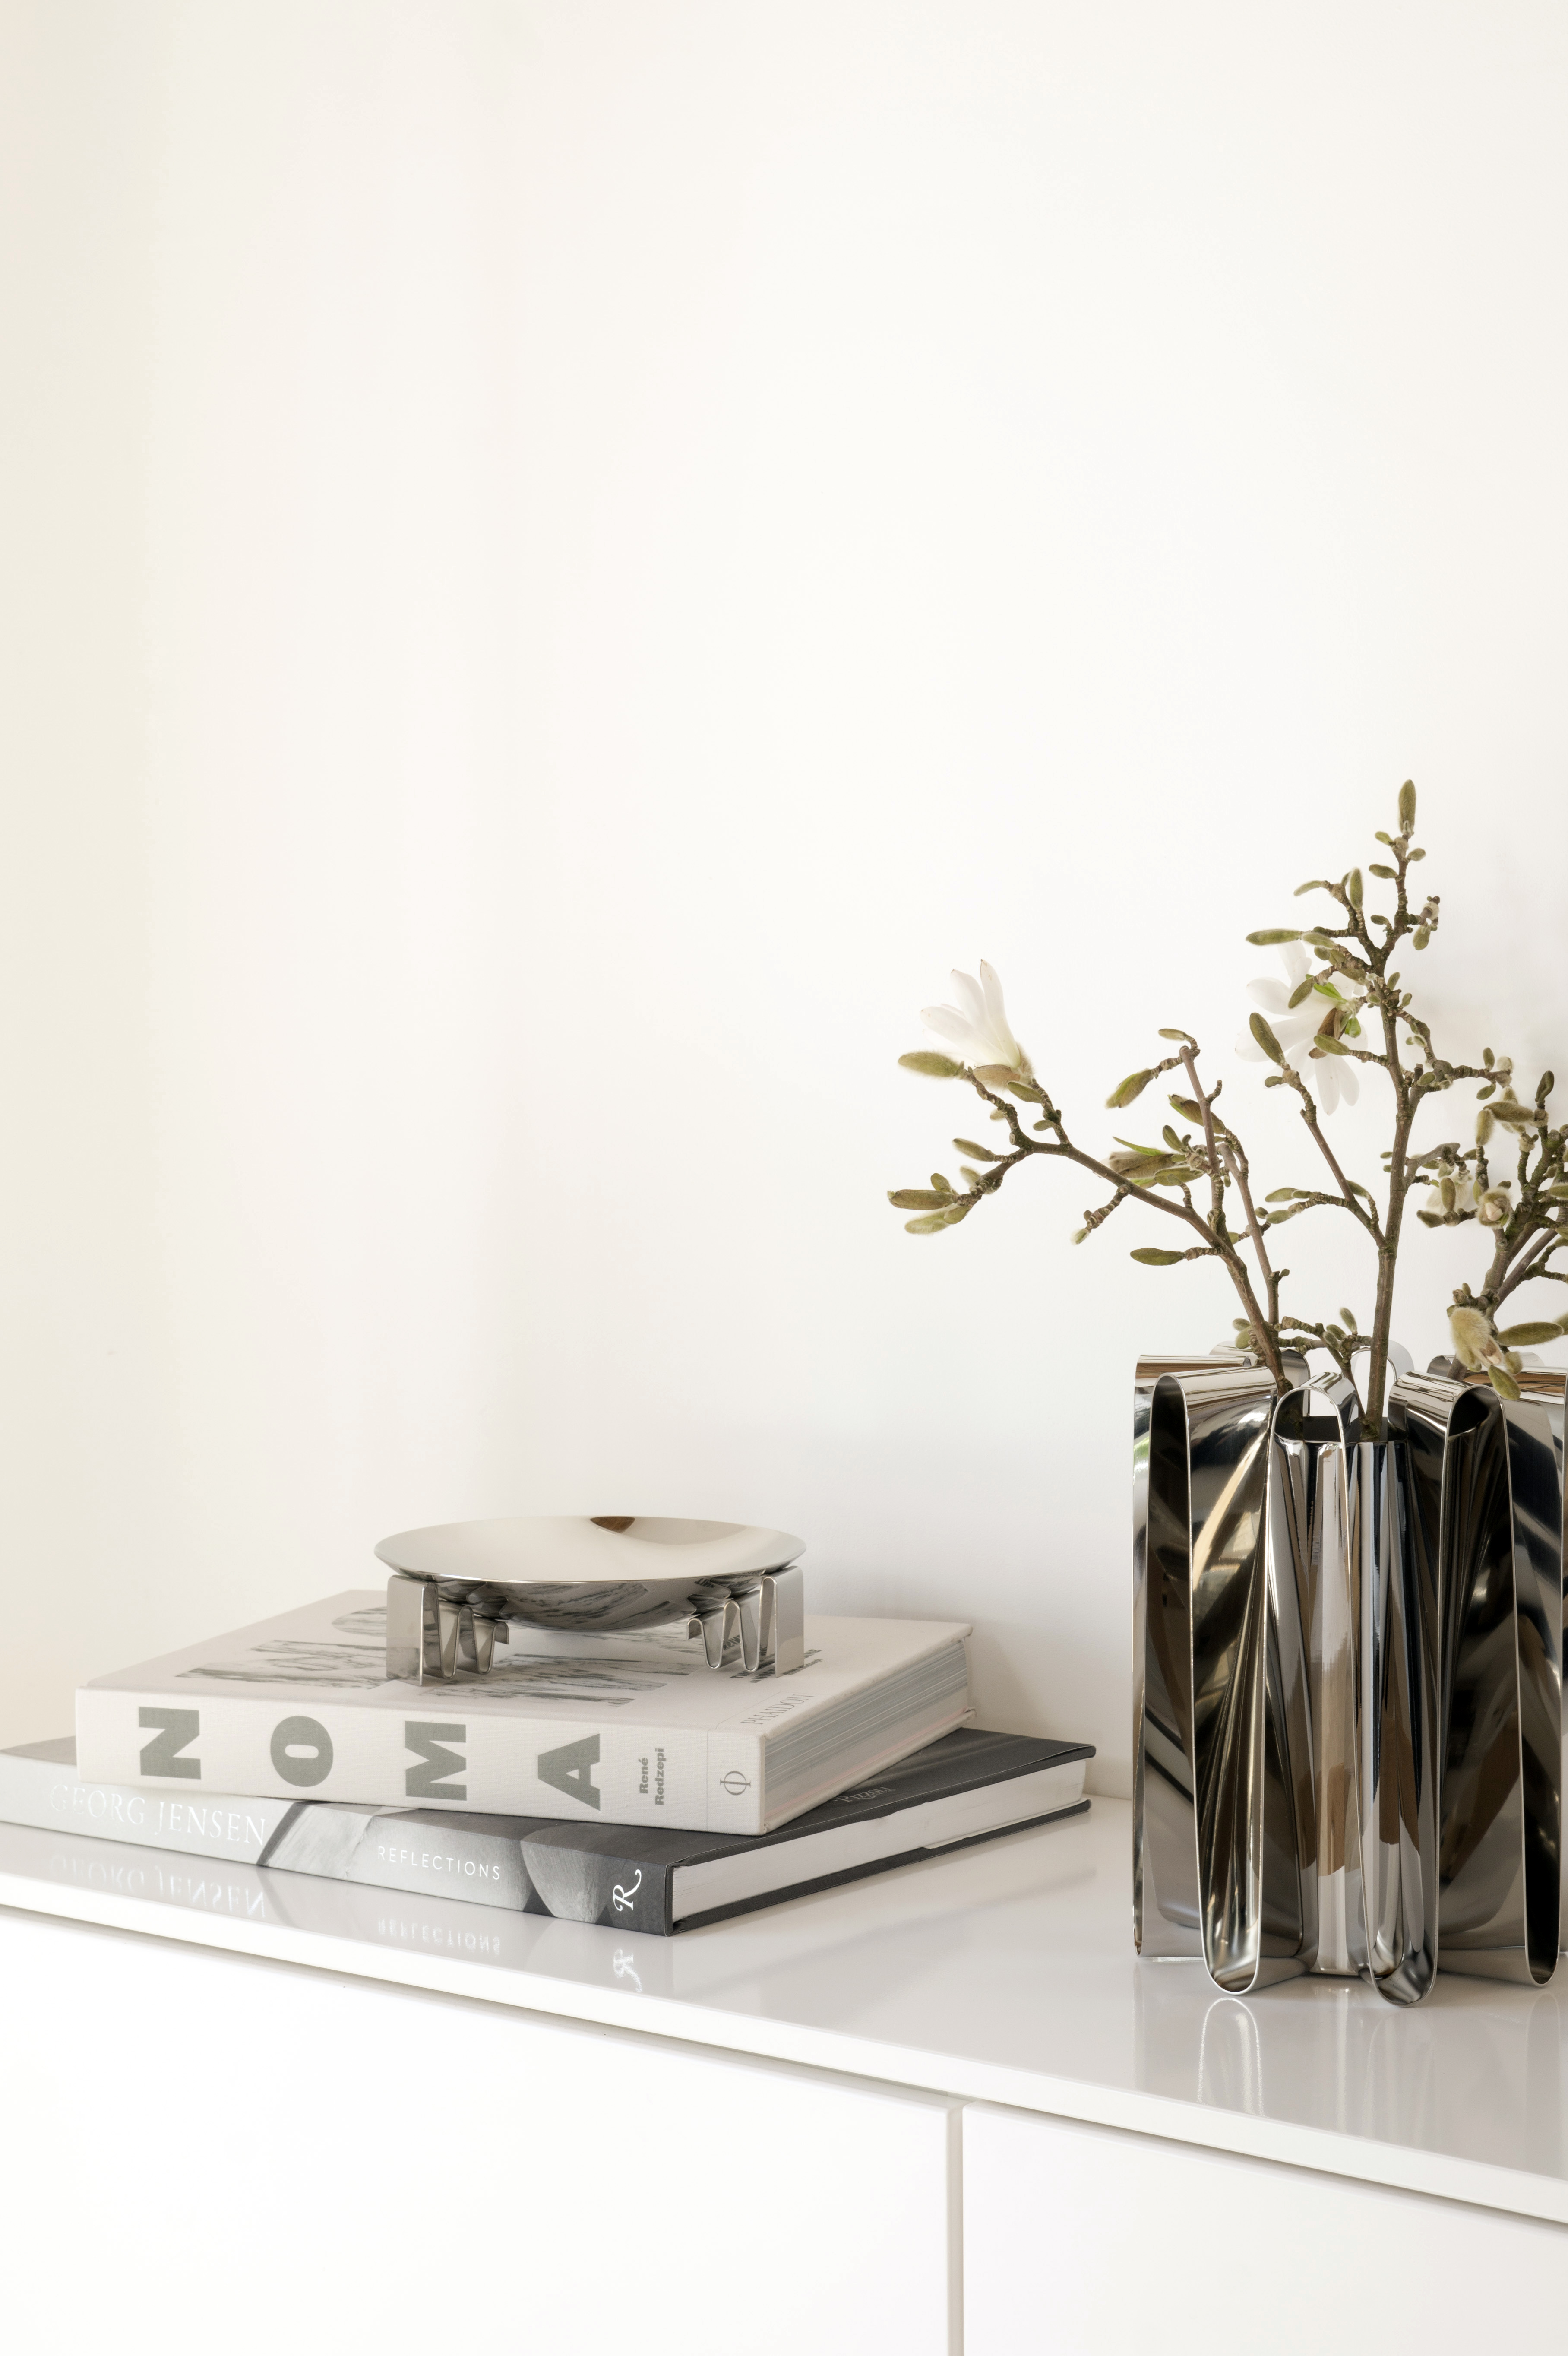 FREQUENCY COLLECTION BY KELLY WEARSTLER FOR GEORG JENSEN